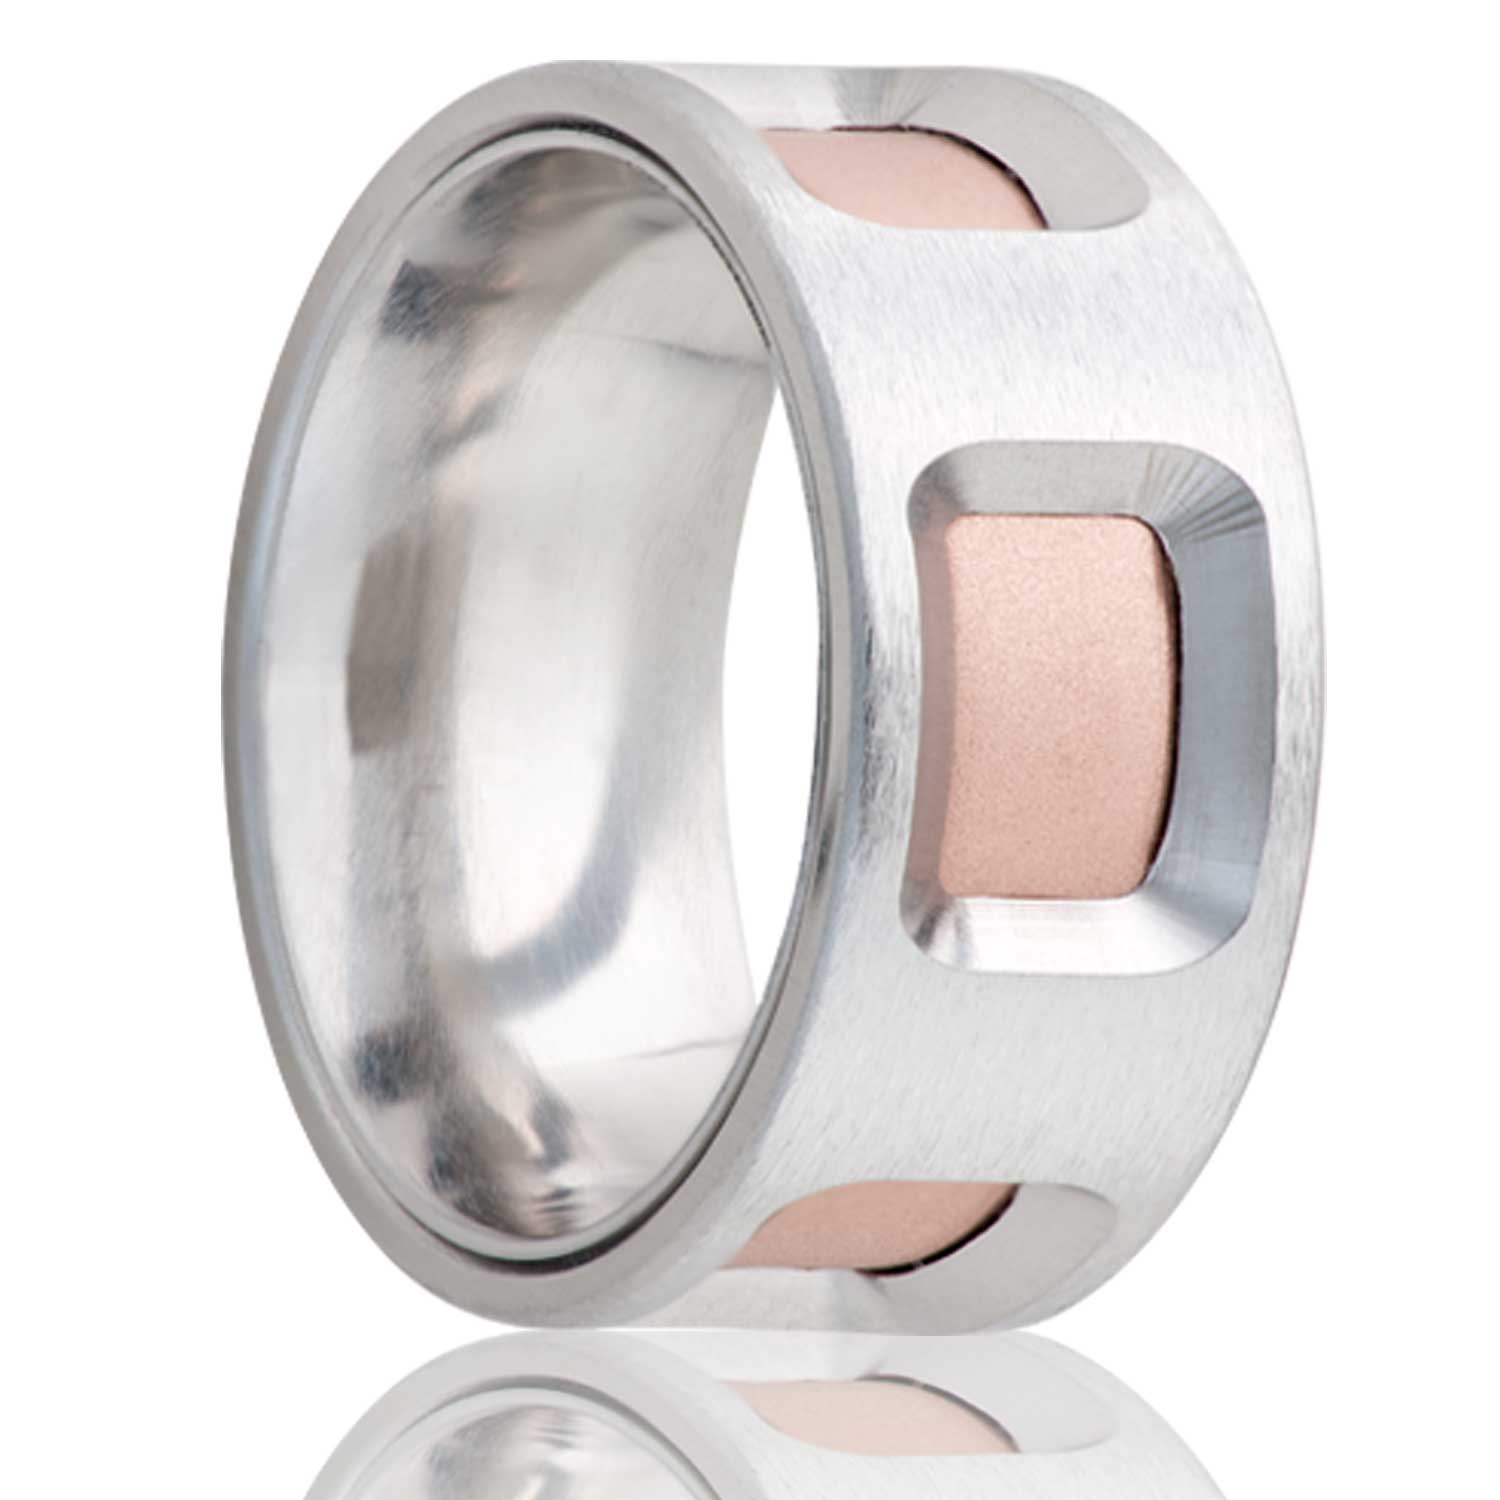 A cobalt men's wedding band with 14k rose gold inlays displayed on a neutral white background.